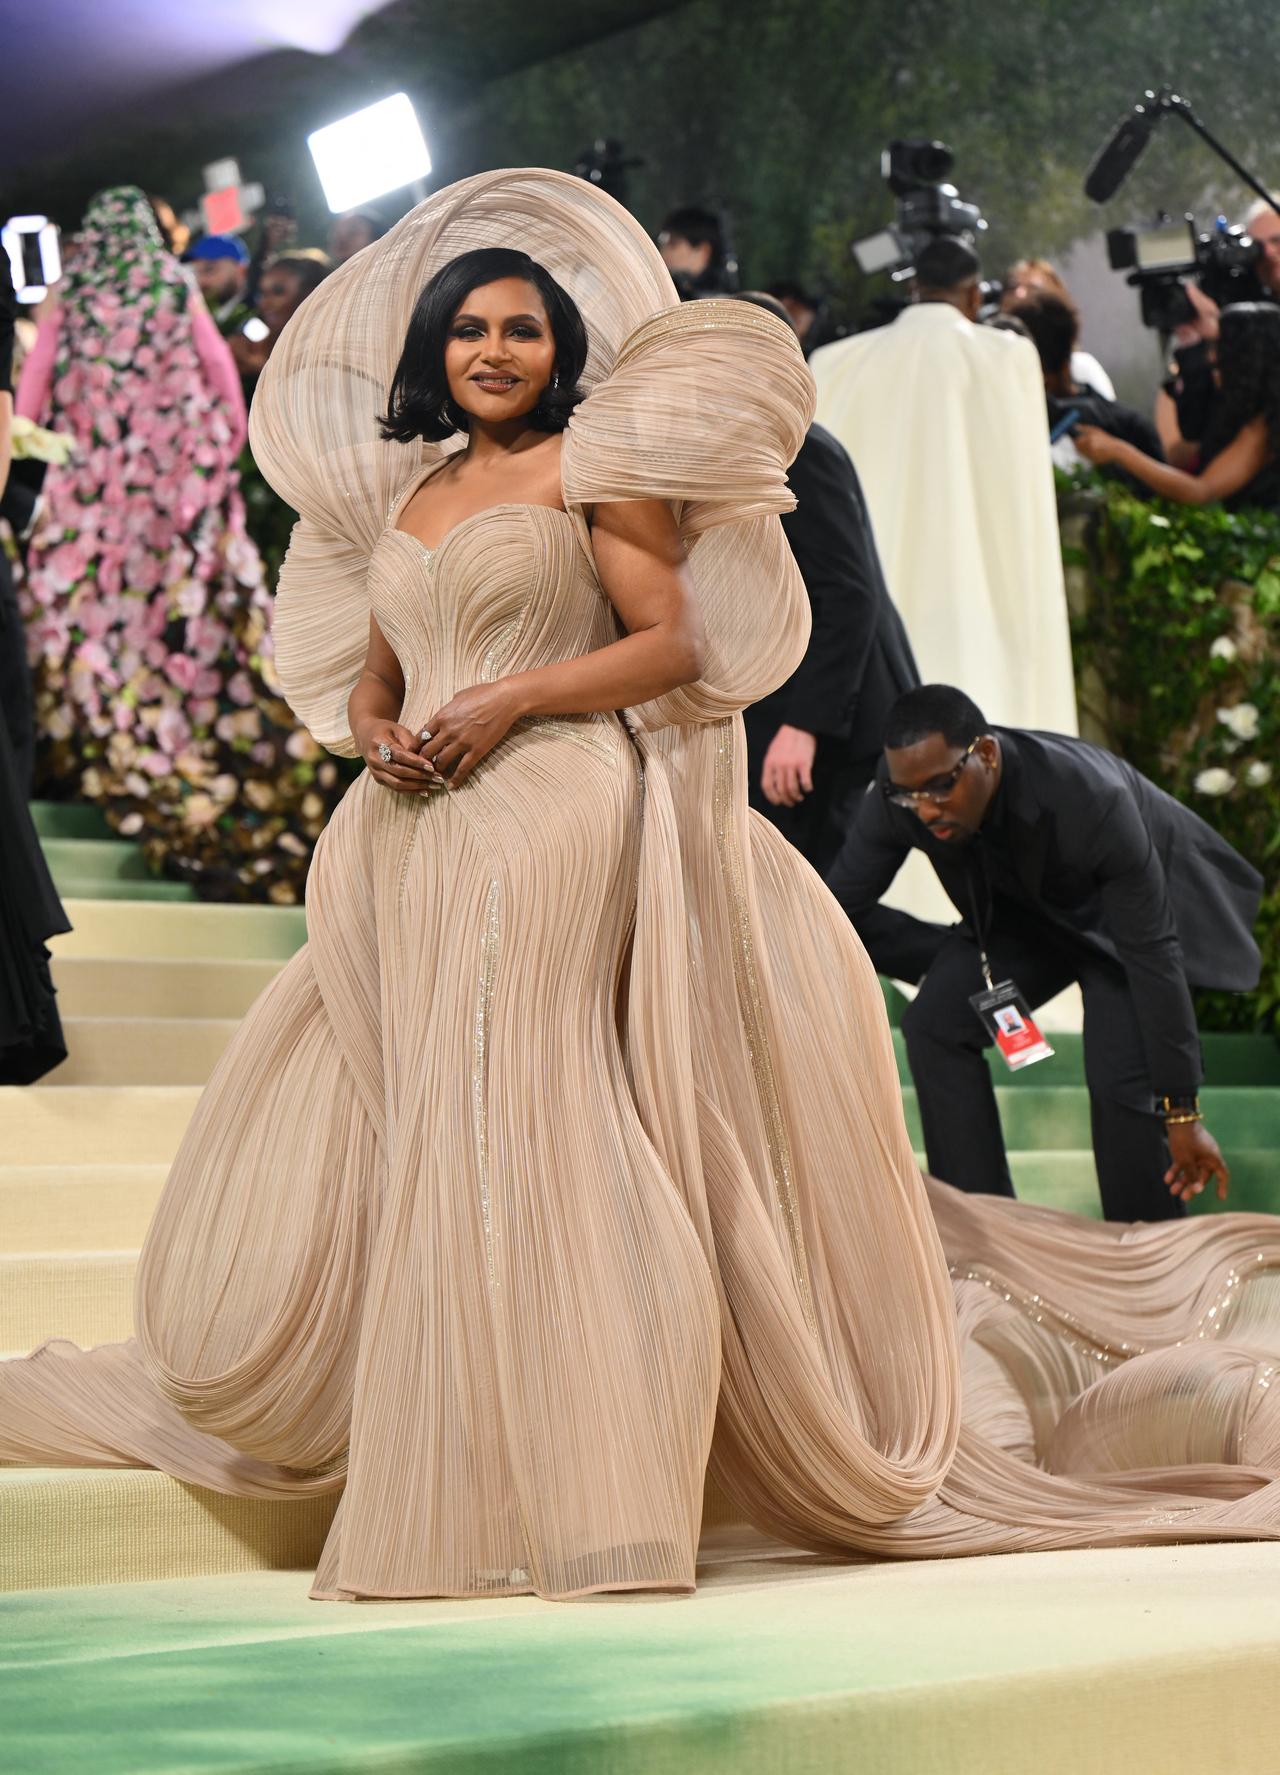 Mindy Kaling turned heads as she strutted the MET Gala carpet in a creation by renowned designer Gaurav Gupta, which was similar to outfits donned by Aishwarya Rai Bachchan and rapper Cardi B in the past. 